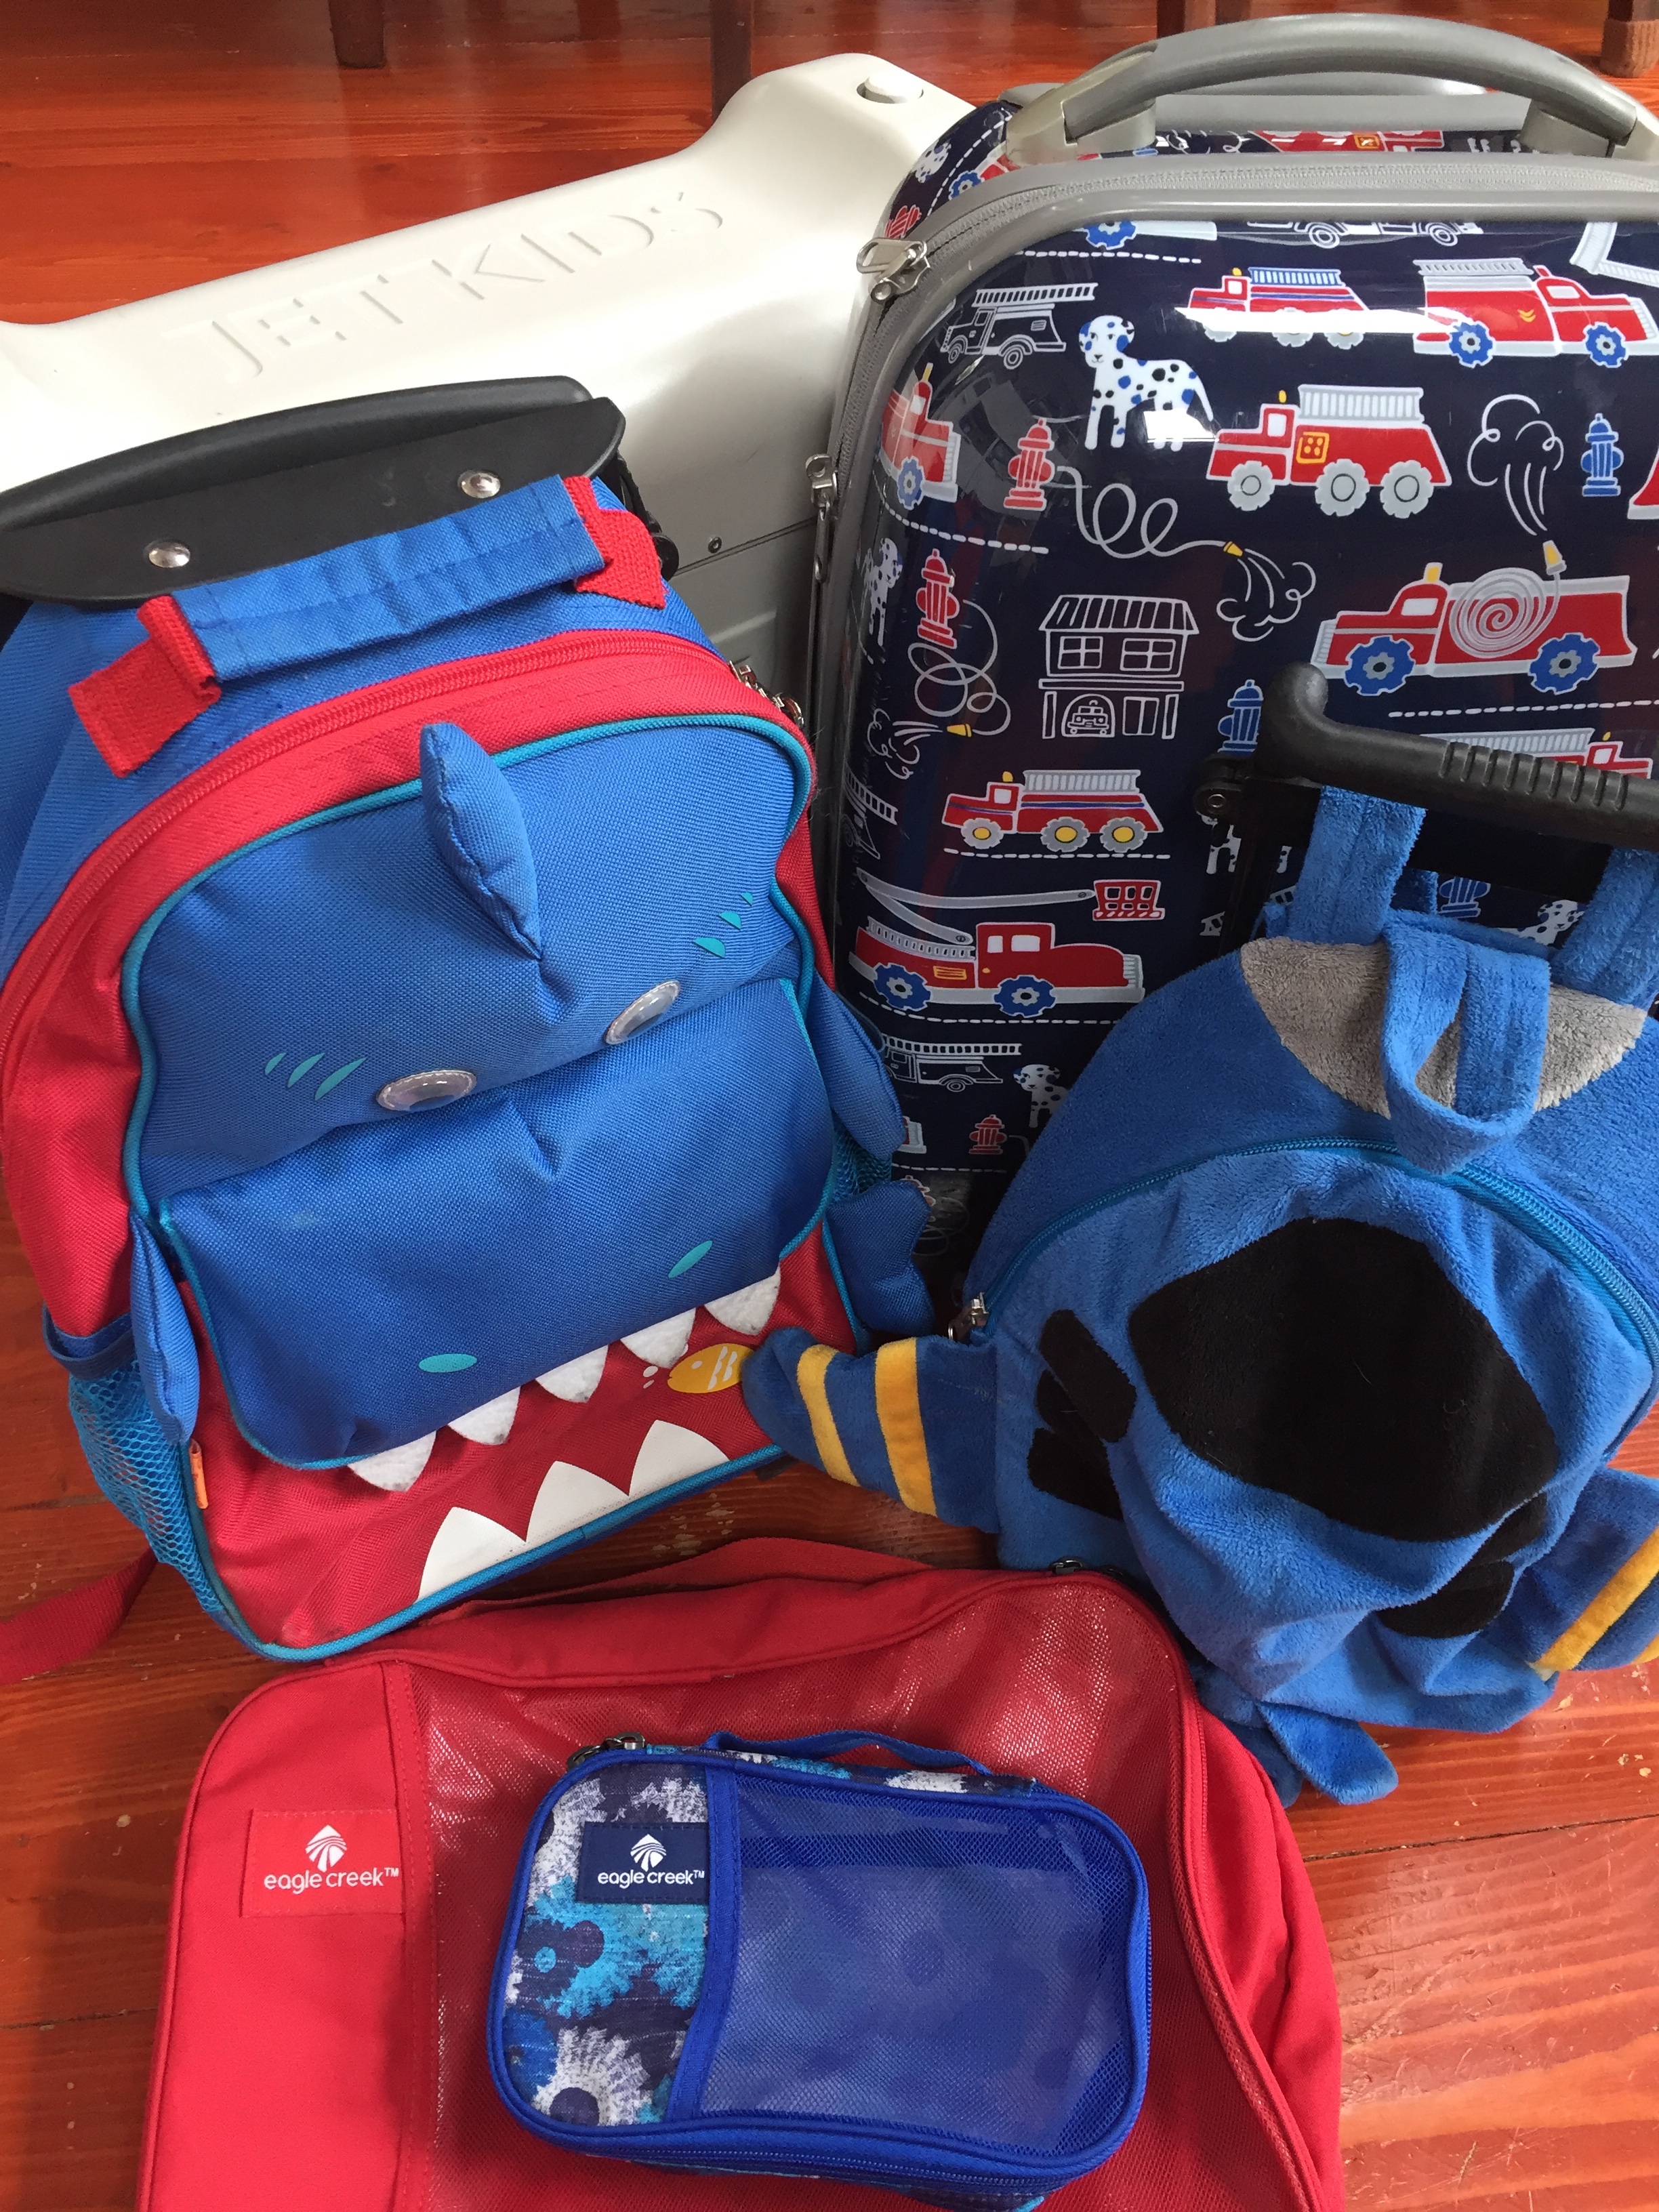 Luggage Options for Kids